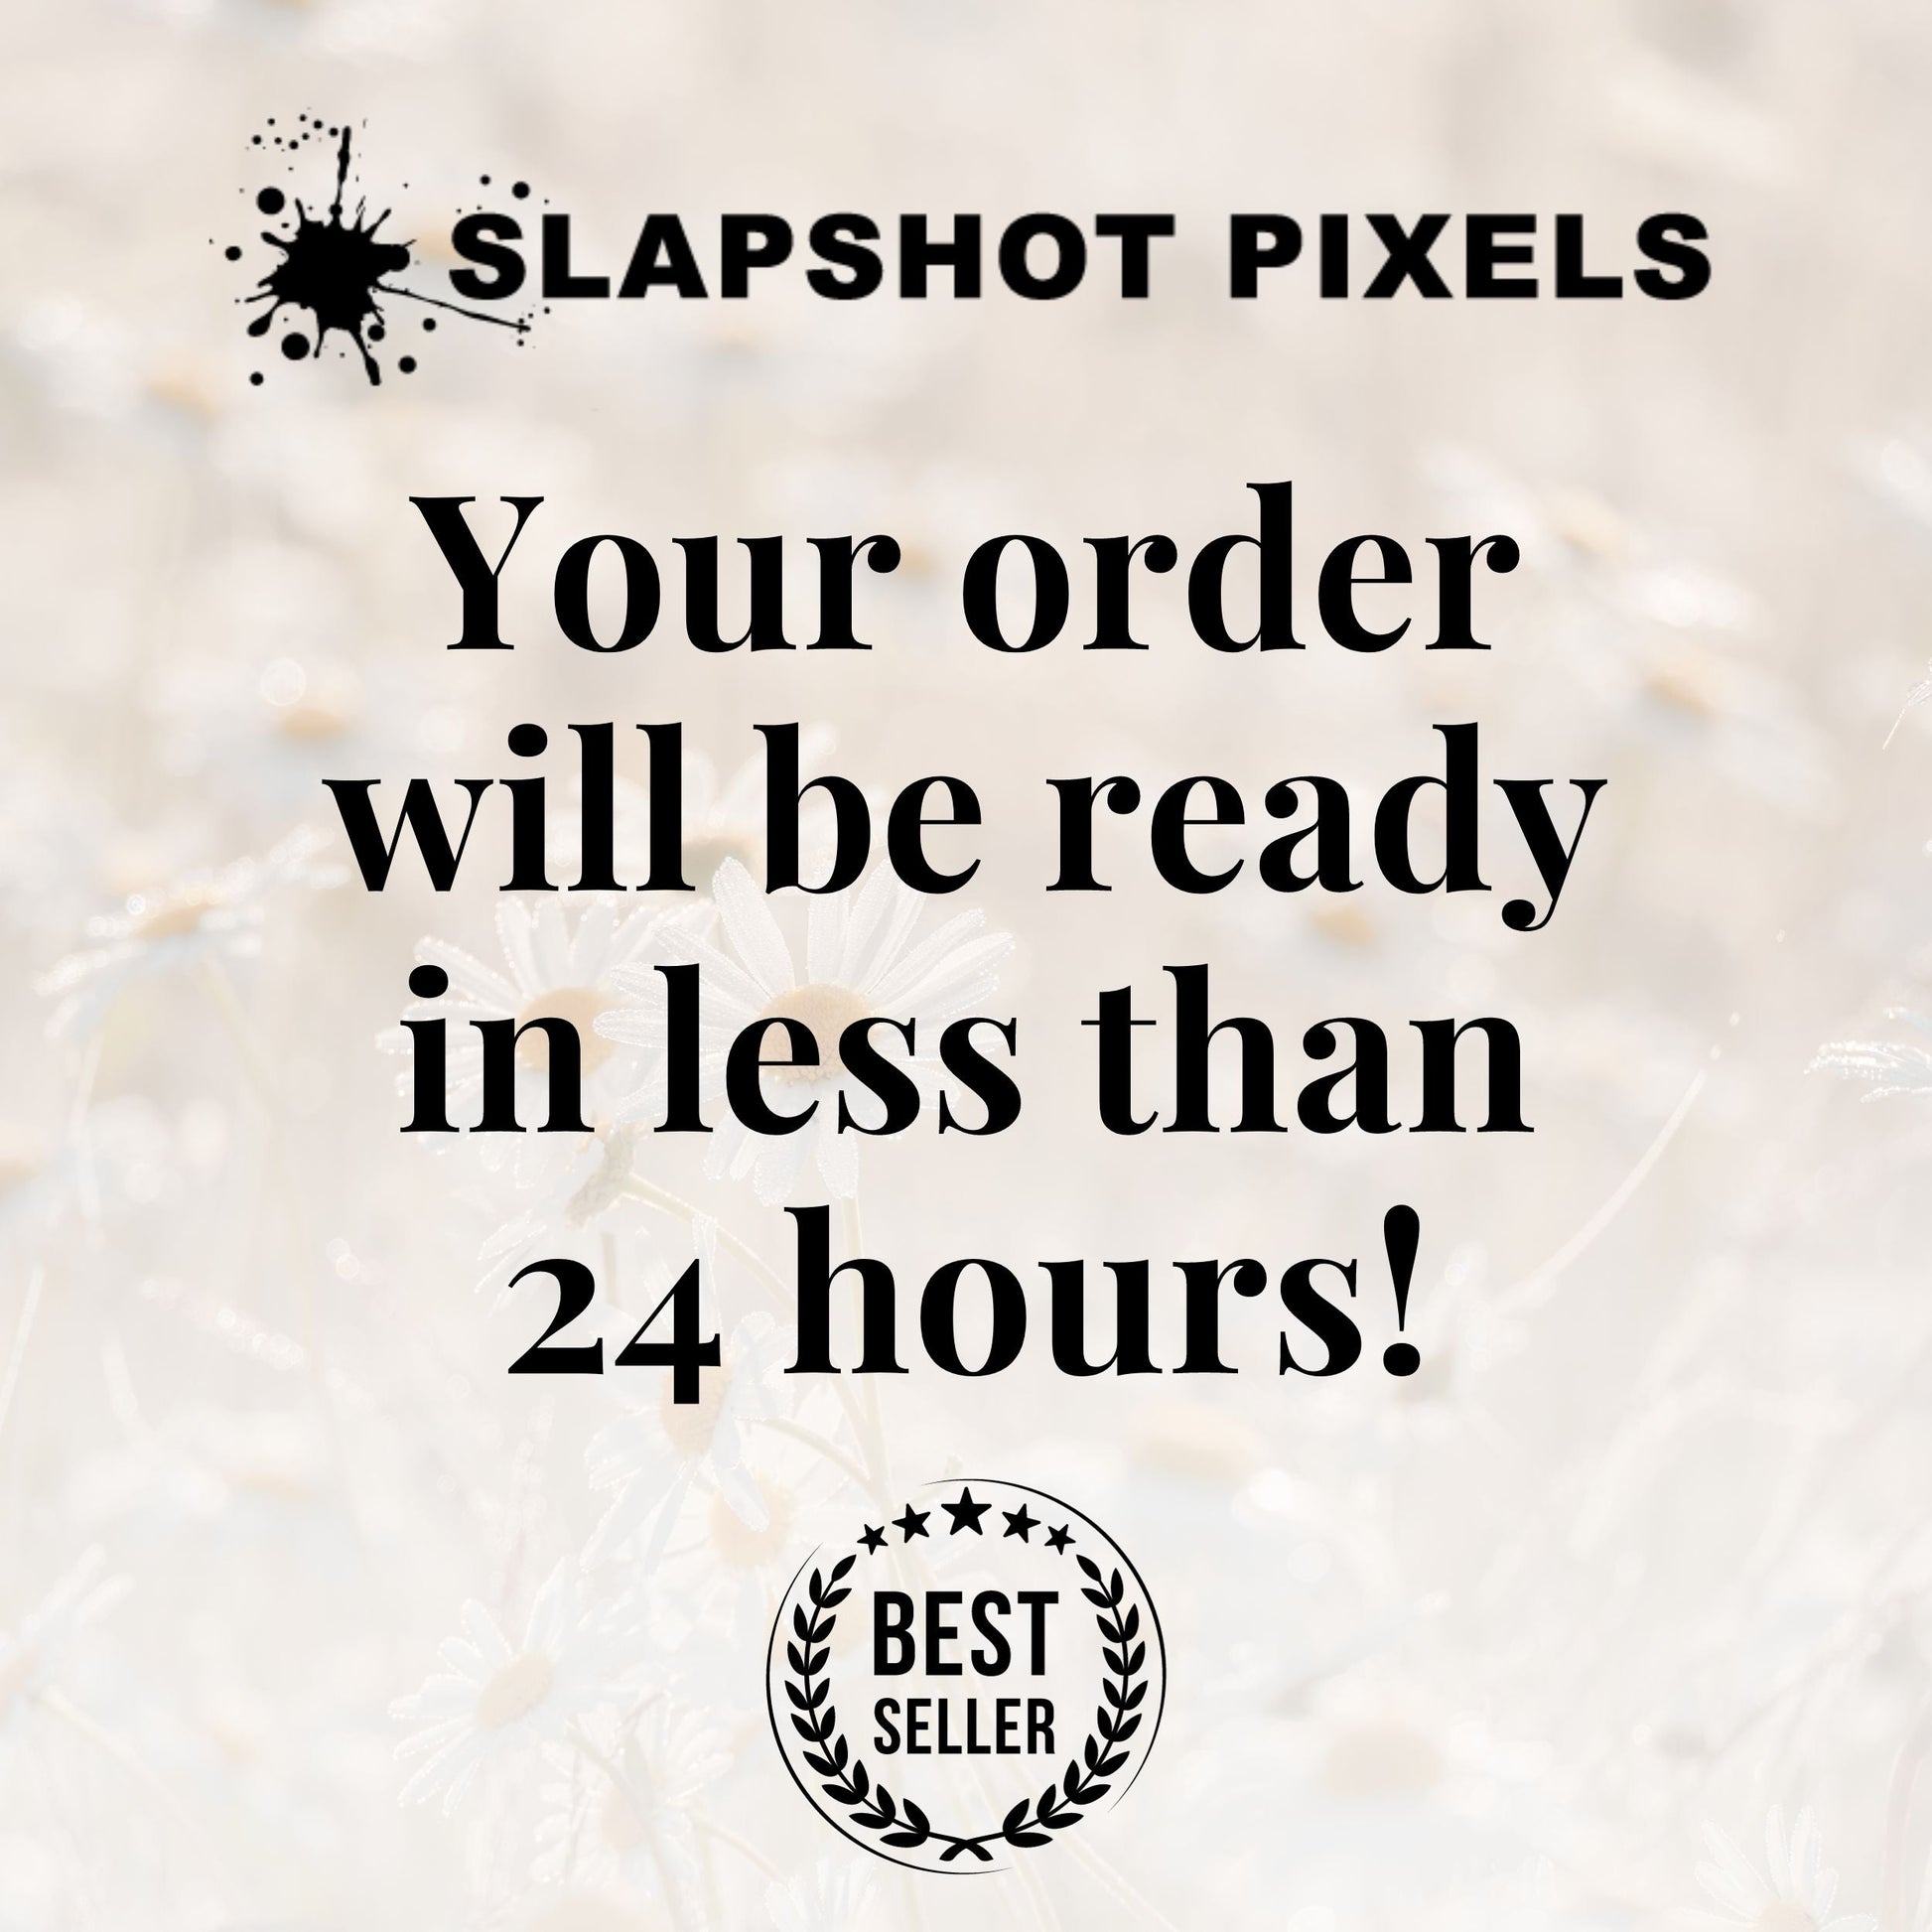 Your order will be ready in 24 hours.